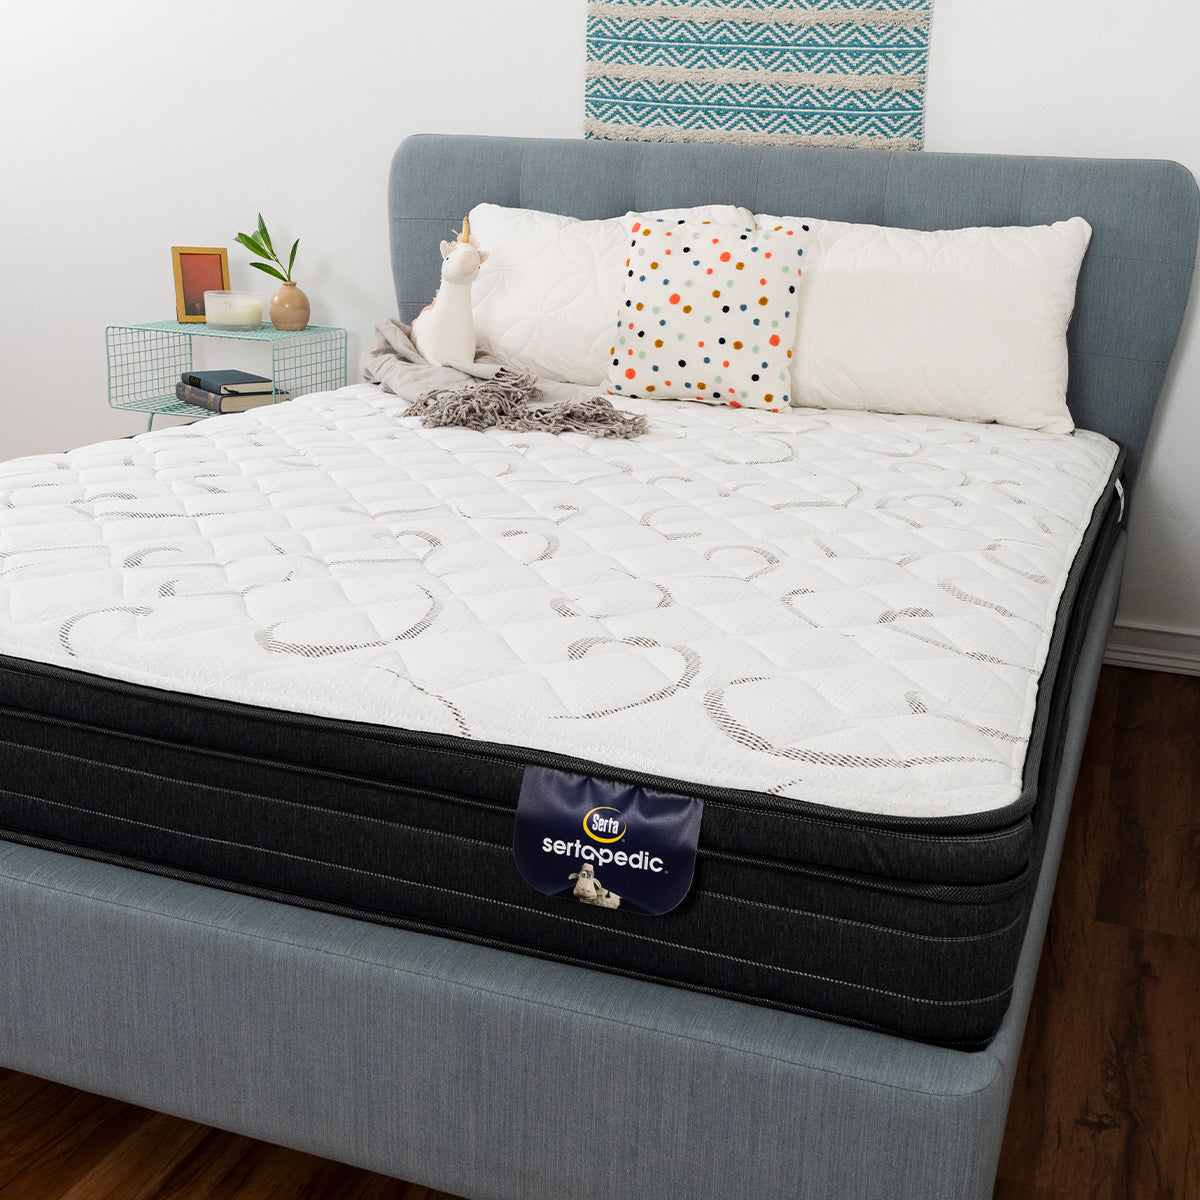 Sertapedic® Elkridge Euro Top Mattress by Serta With Blank, Unicorn Plushie, And Pillows On Bed Frame In Bedroom With A Bedside Table. Front View Showing Product Tag Label And Fabric Detail.